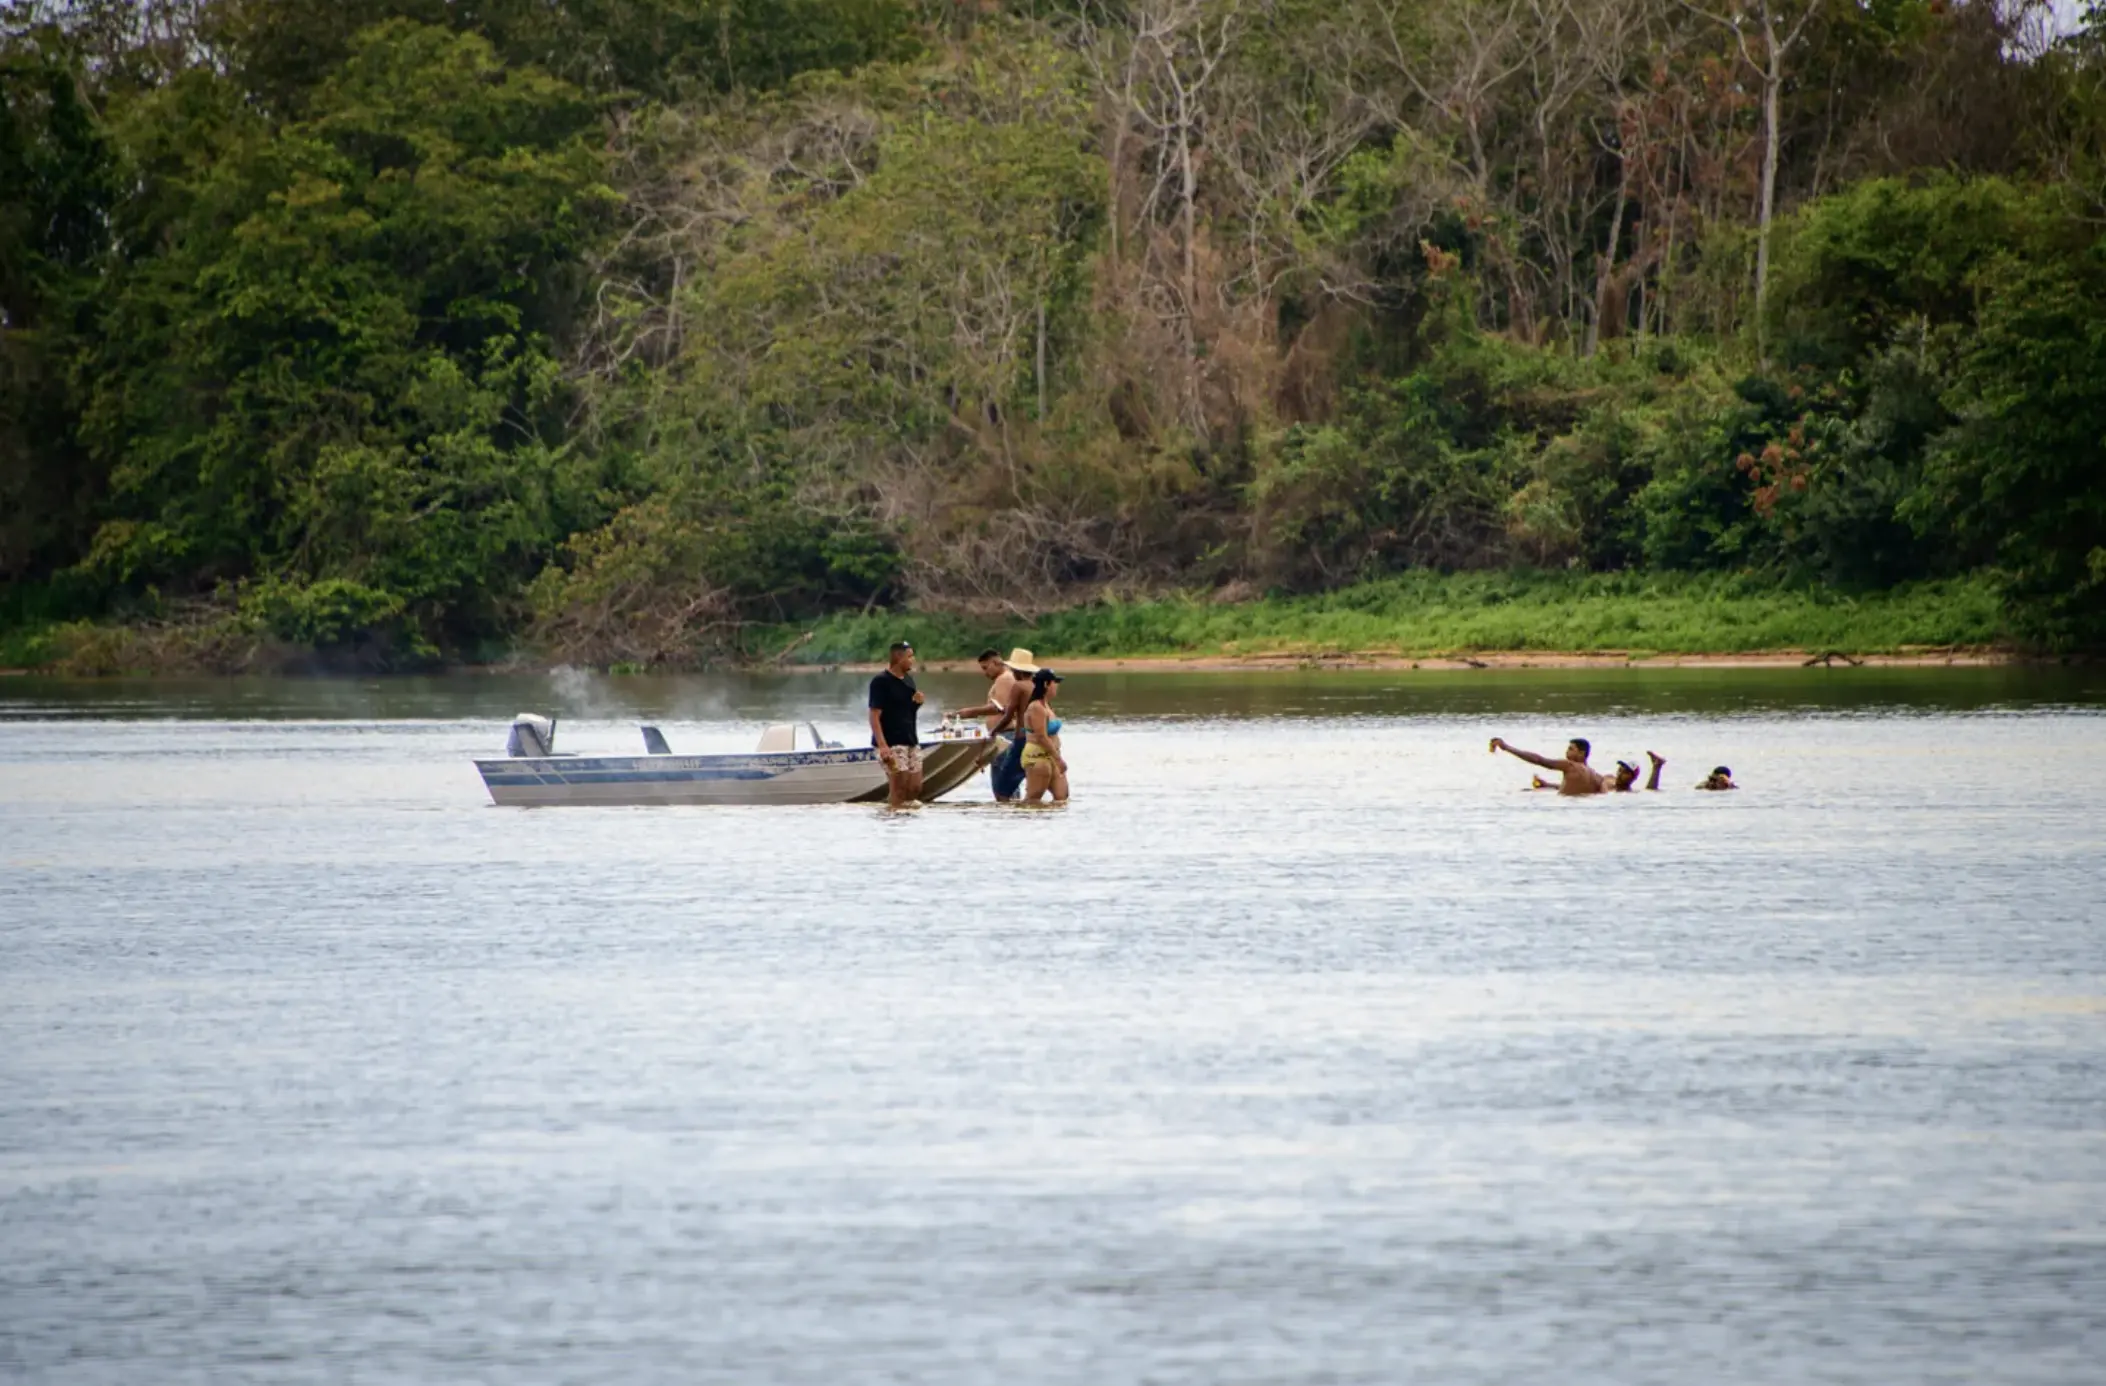 Tourists have a barbecue on the river in a motorboat